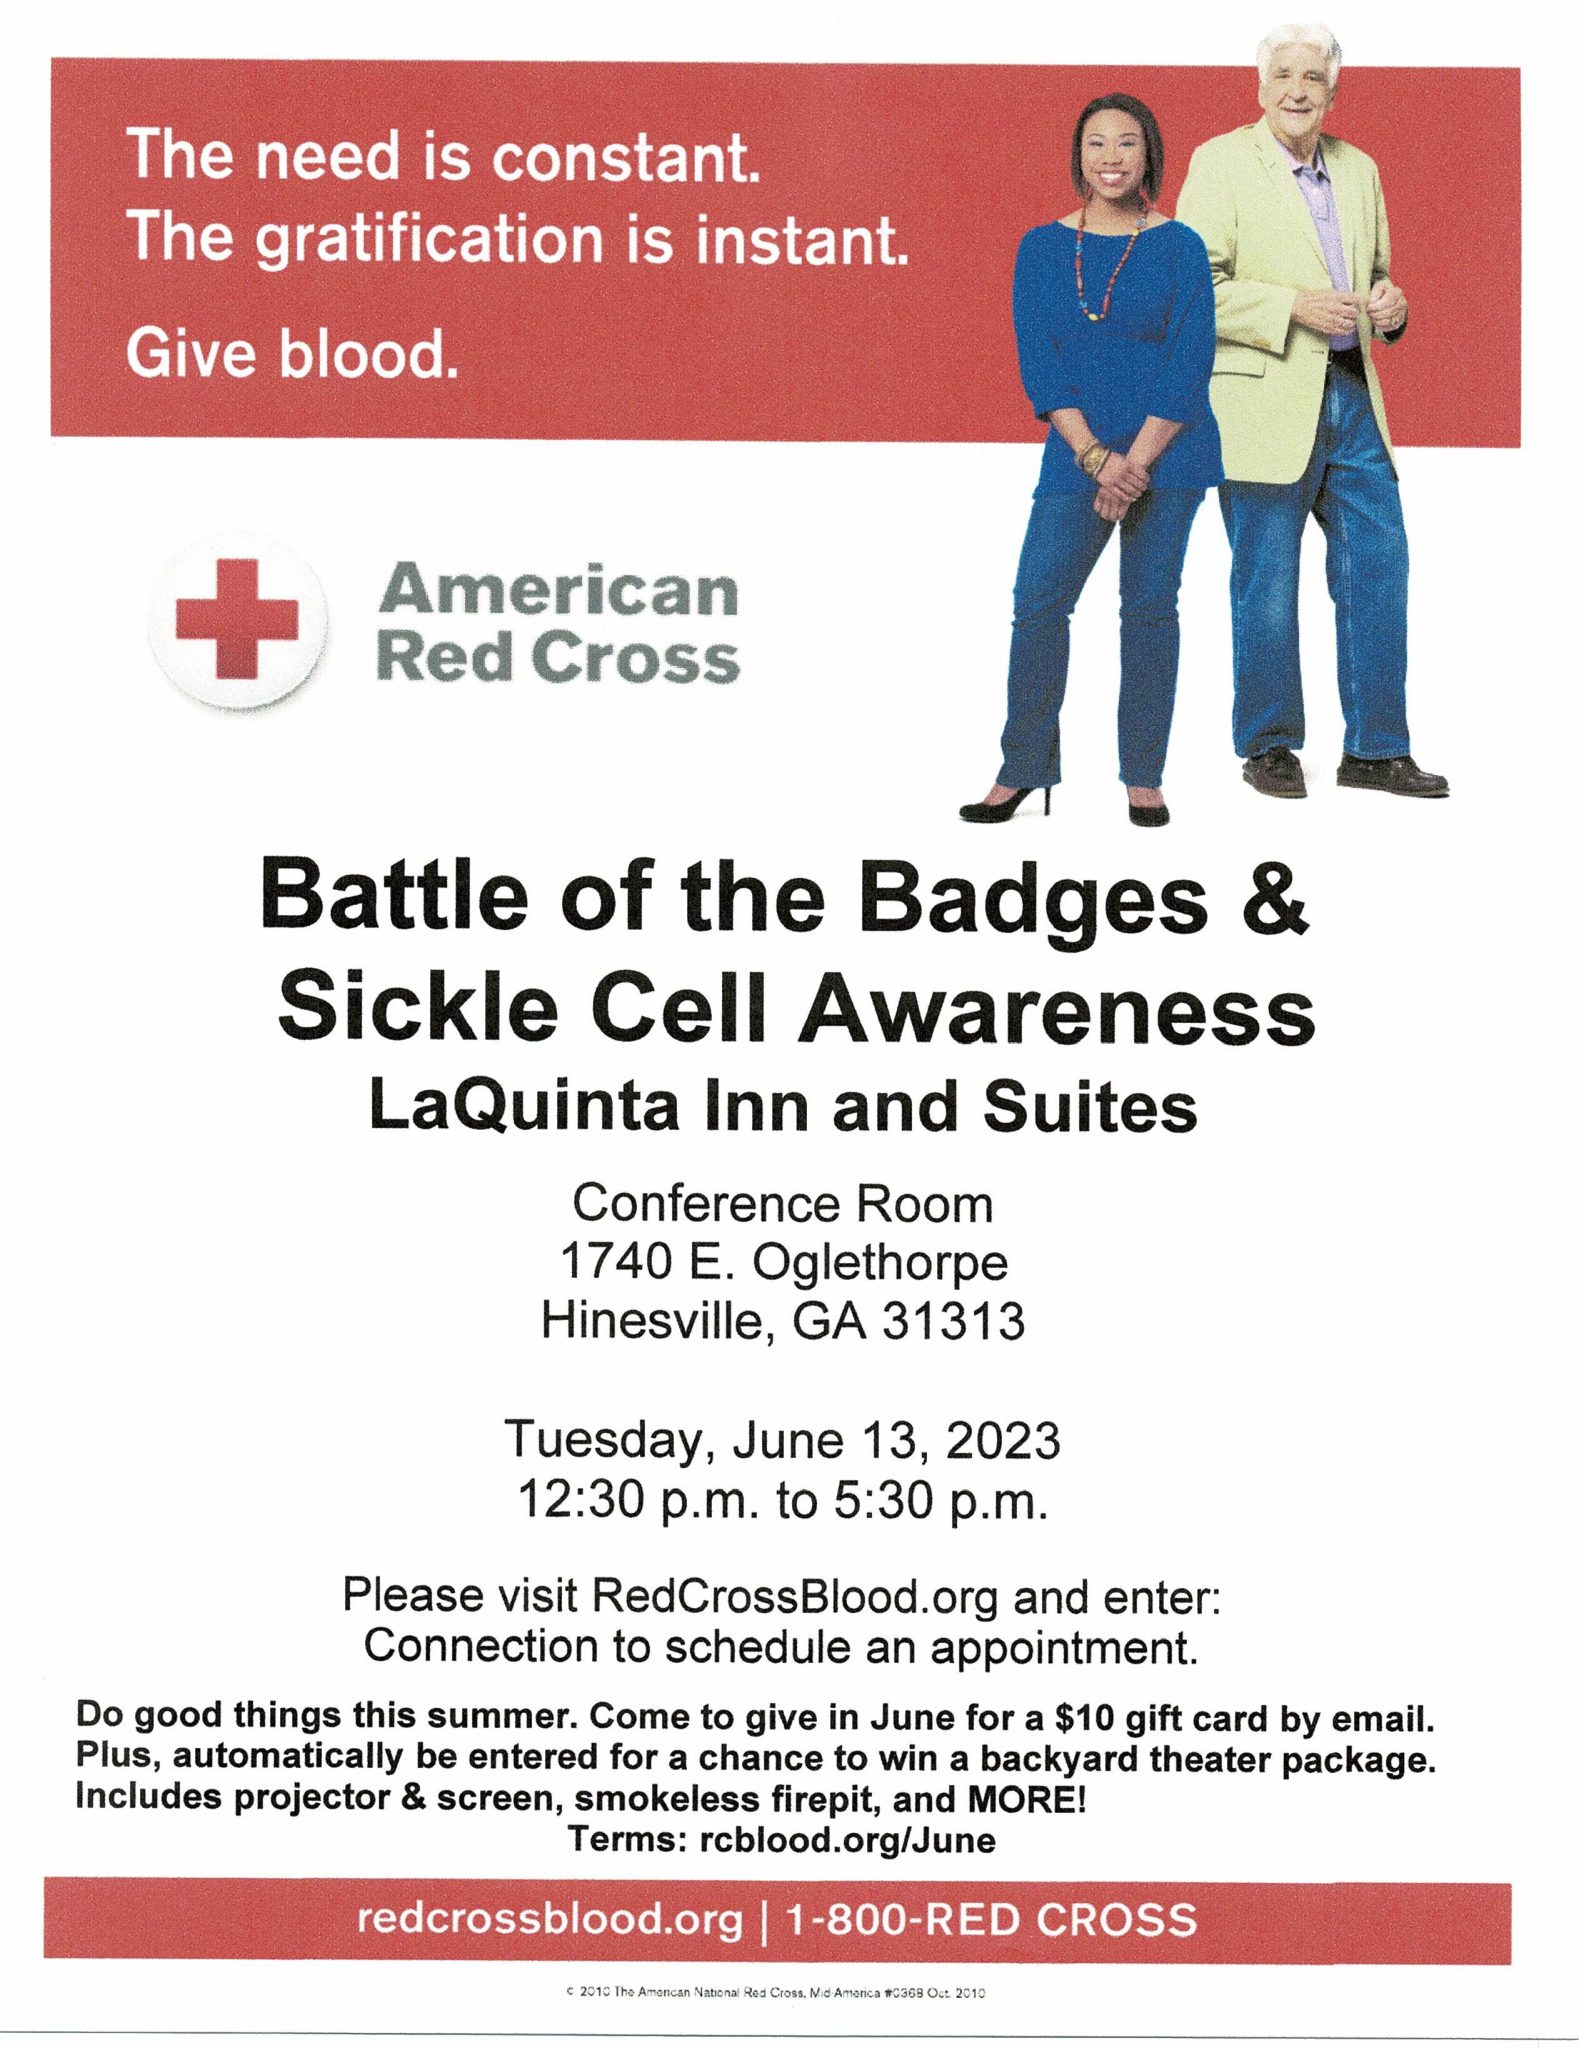 Battle of the Badges & Sickle Cell Awareness flyer